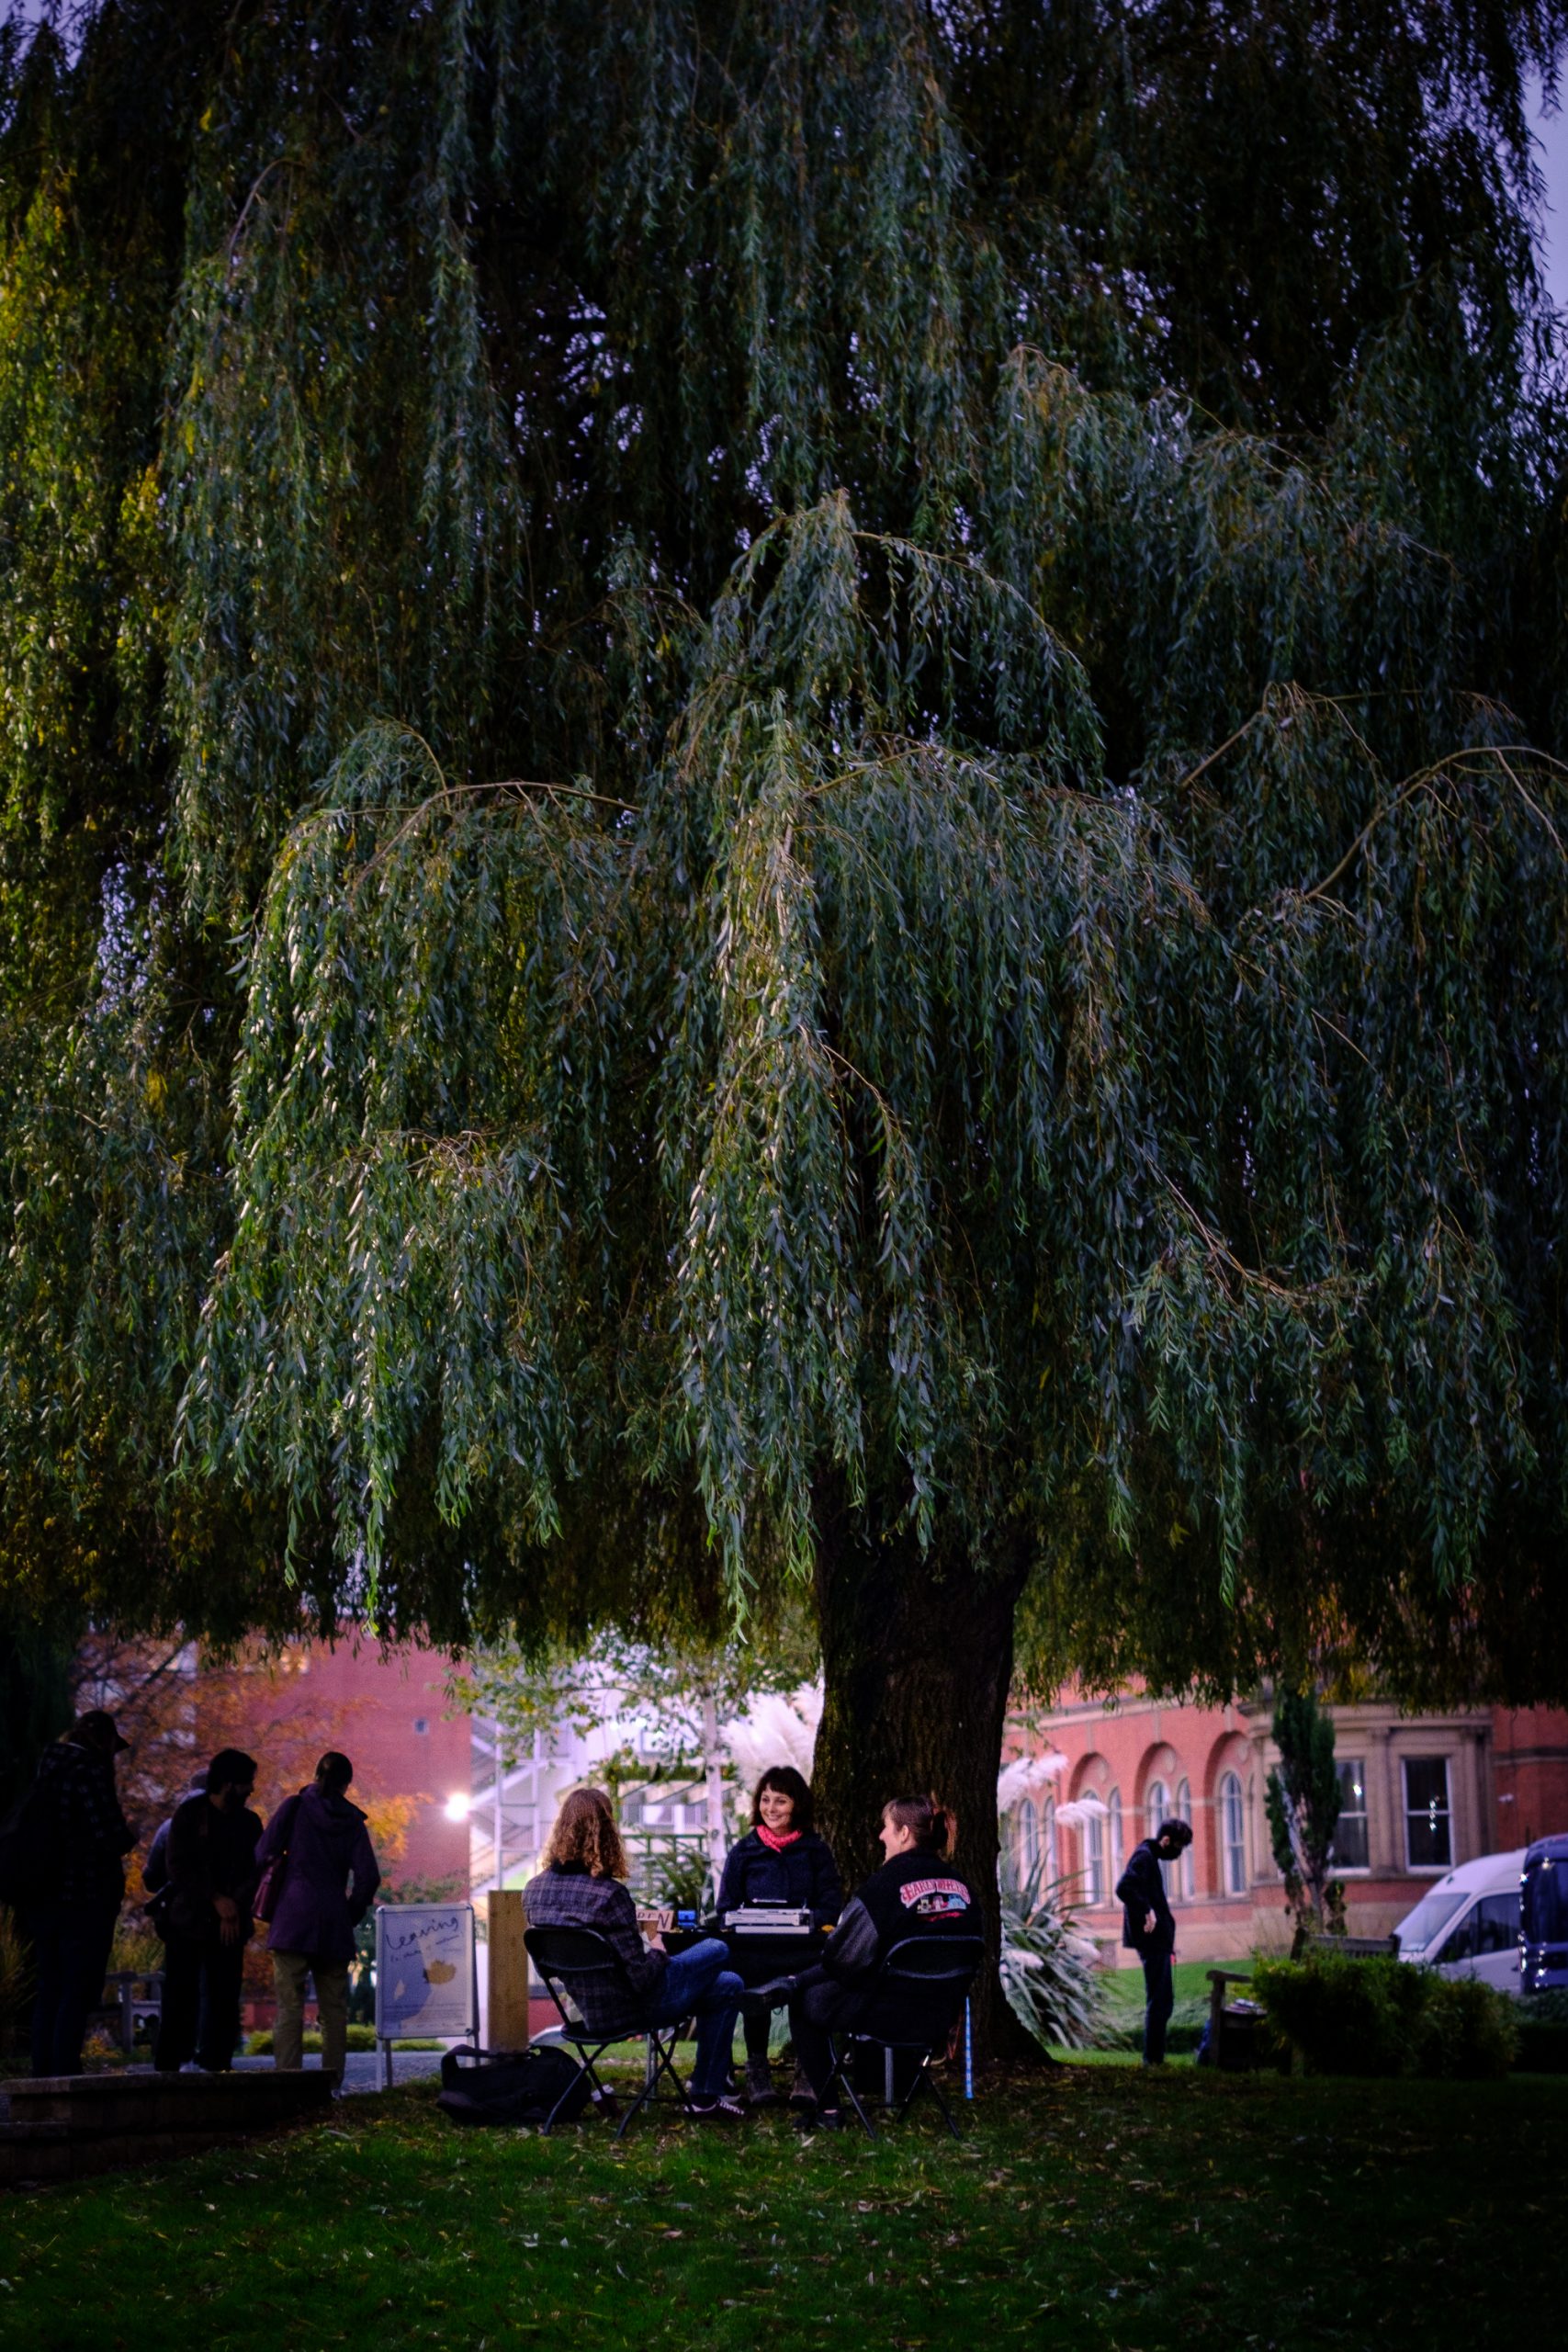 A large willow tree takes up most of the image. Underneath the tree, three people sit chatting and smiling around a small table. The image was taken around sunset, so the light is beginning to fade. Passers by walk by.